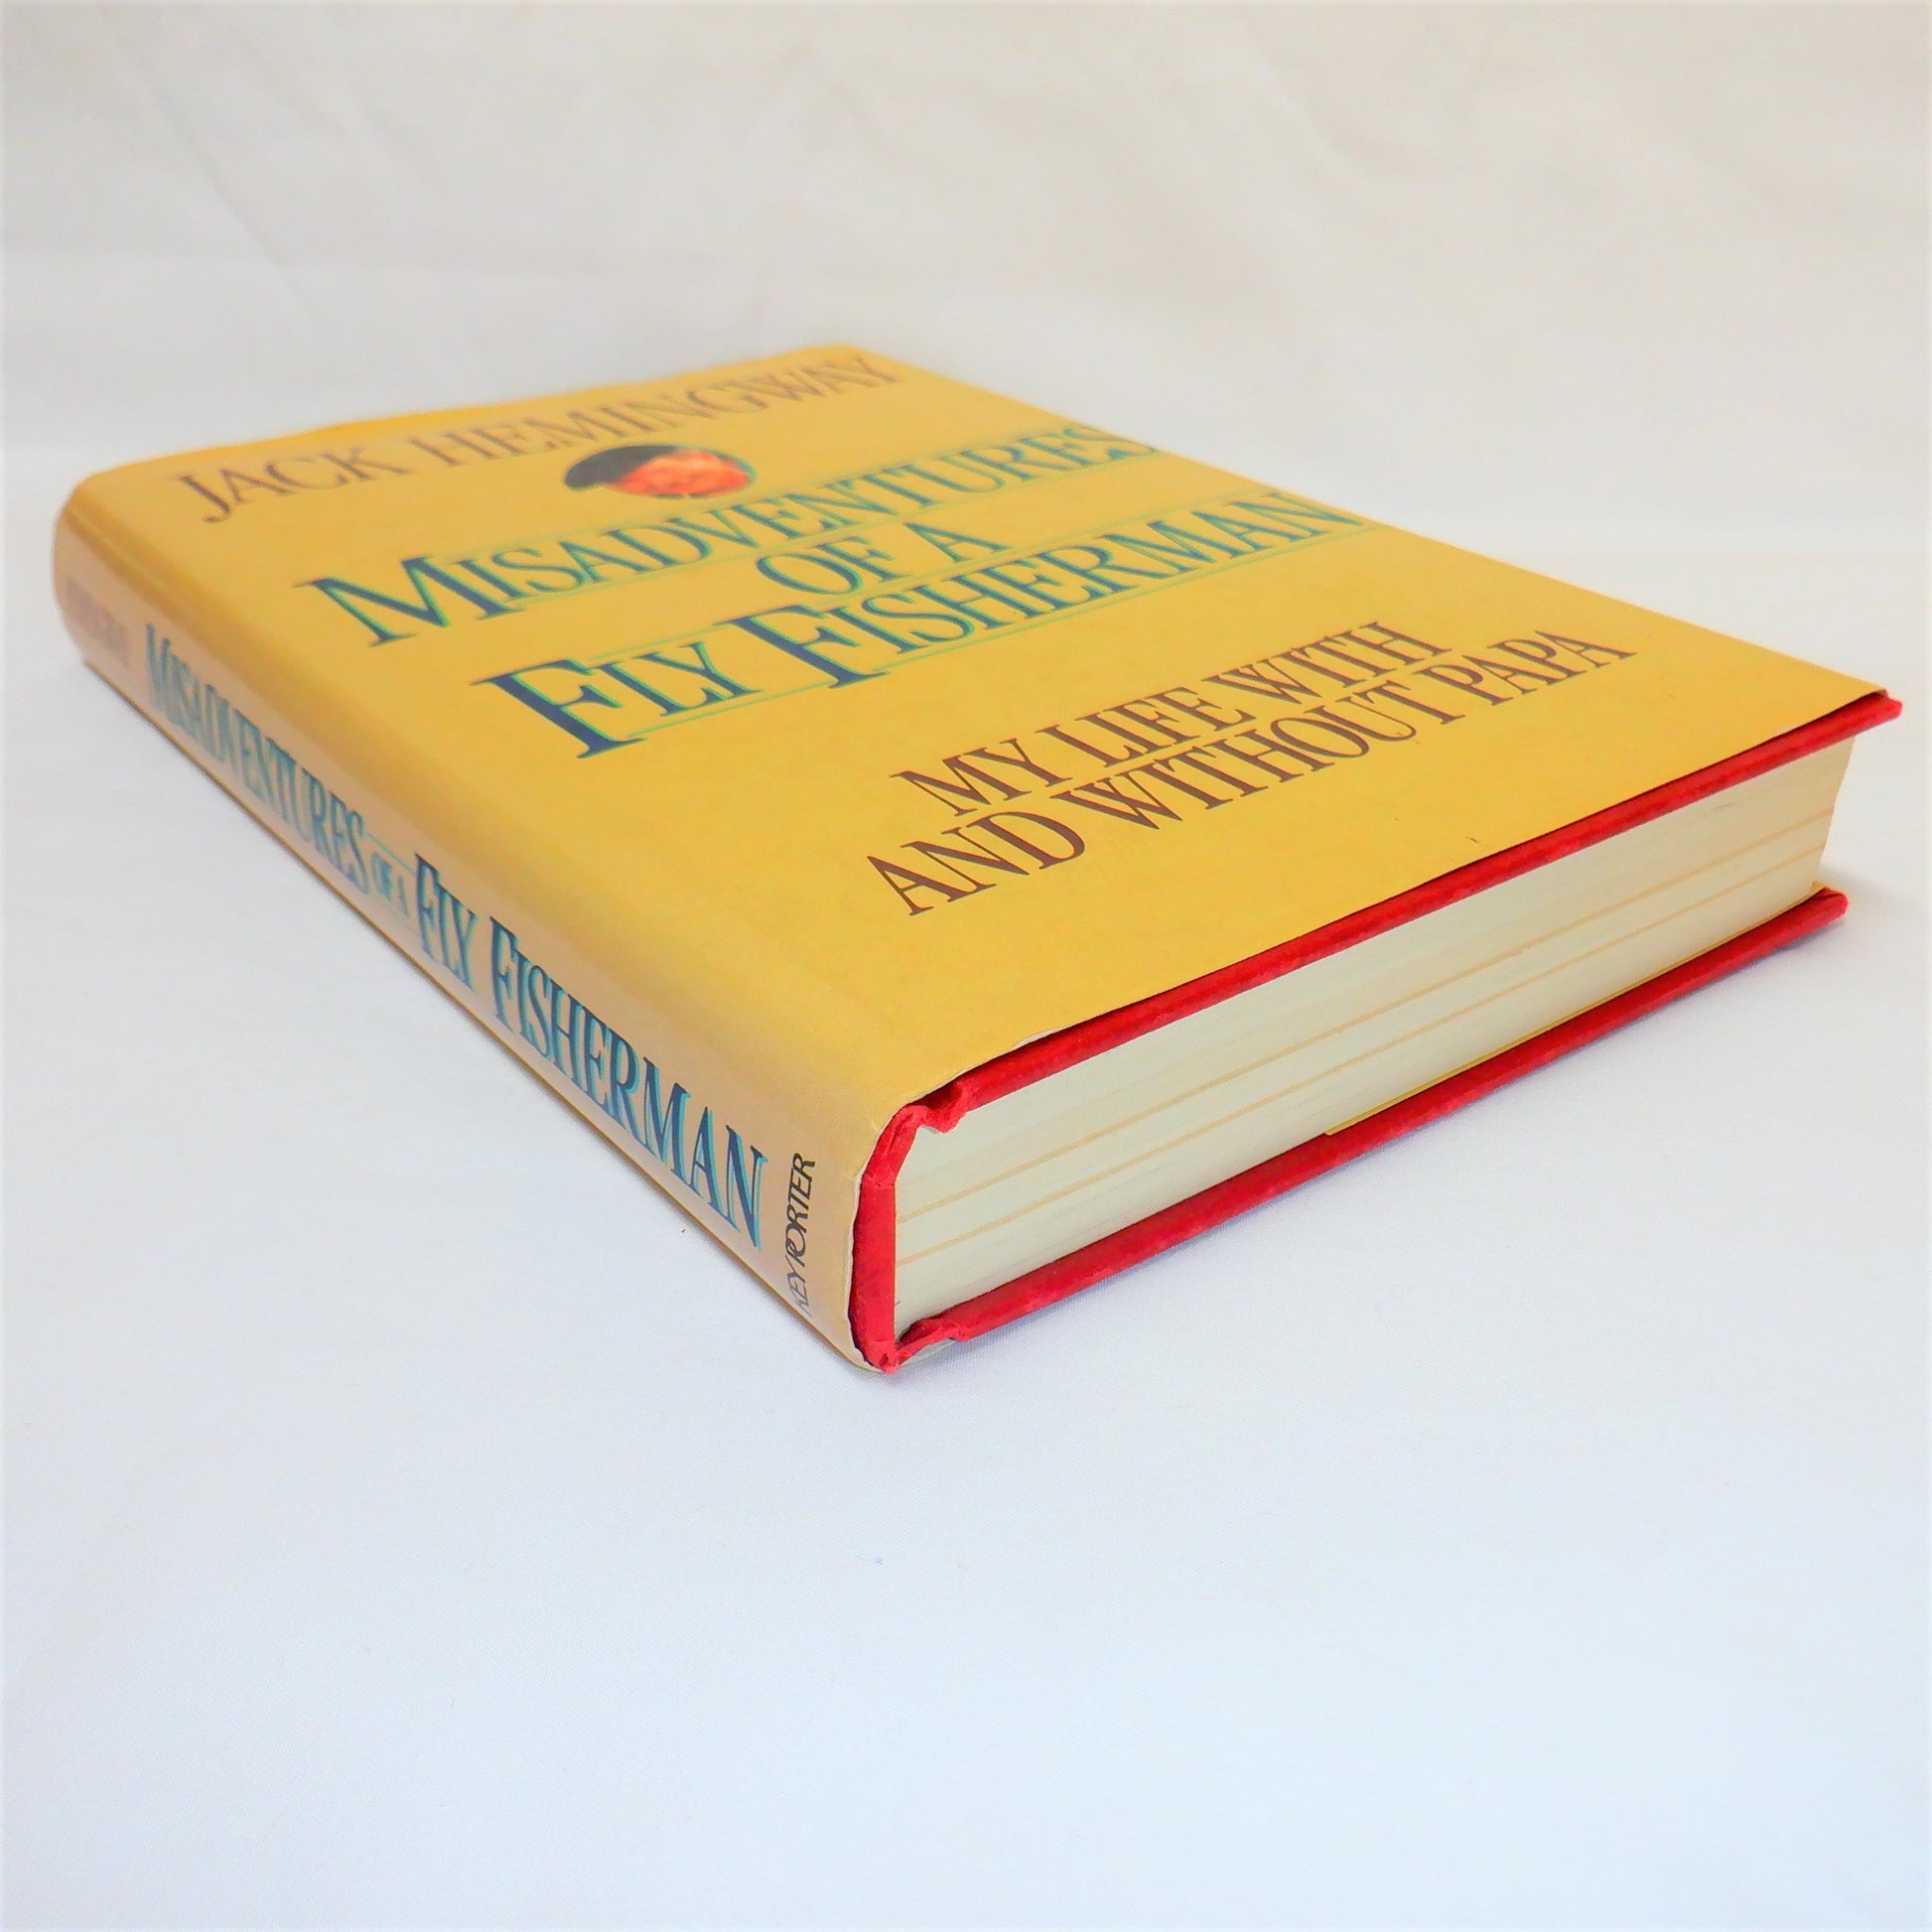 Misadventures OF A FLY FISHERMAN: My Life With and Without Papa, by Jack  Hemingway, (1986 1st Ed.)